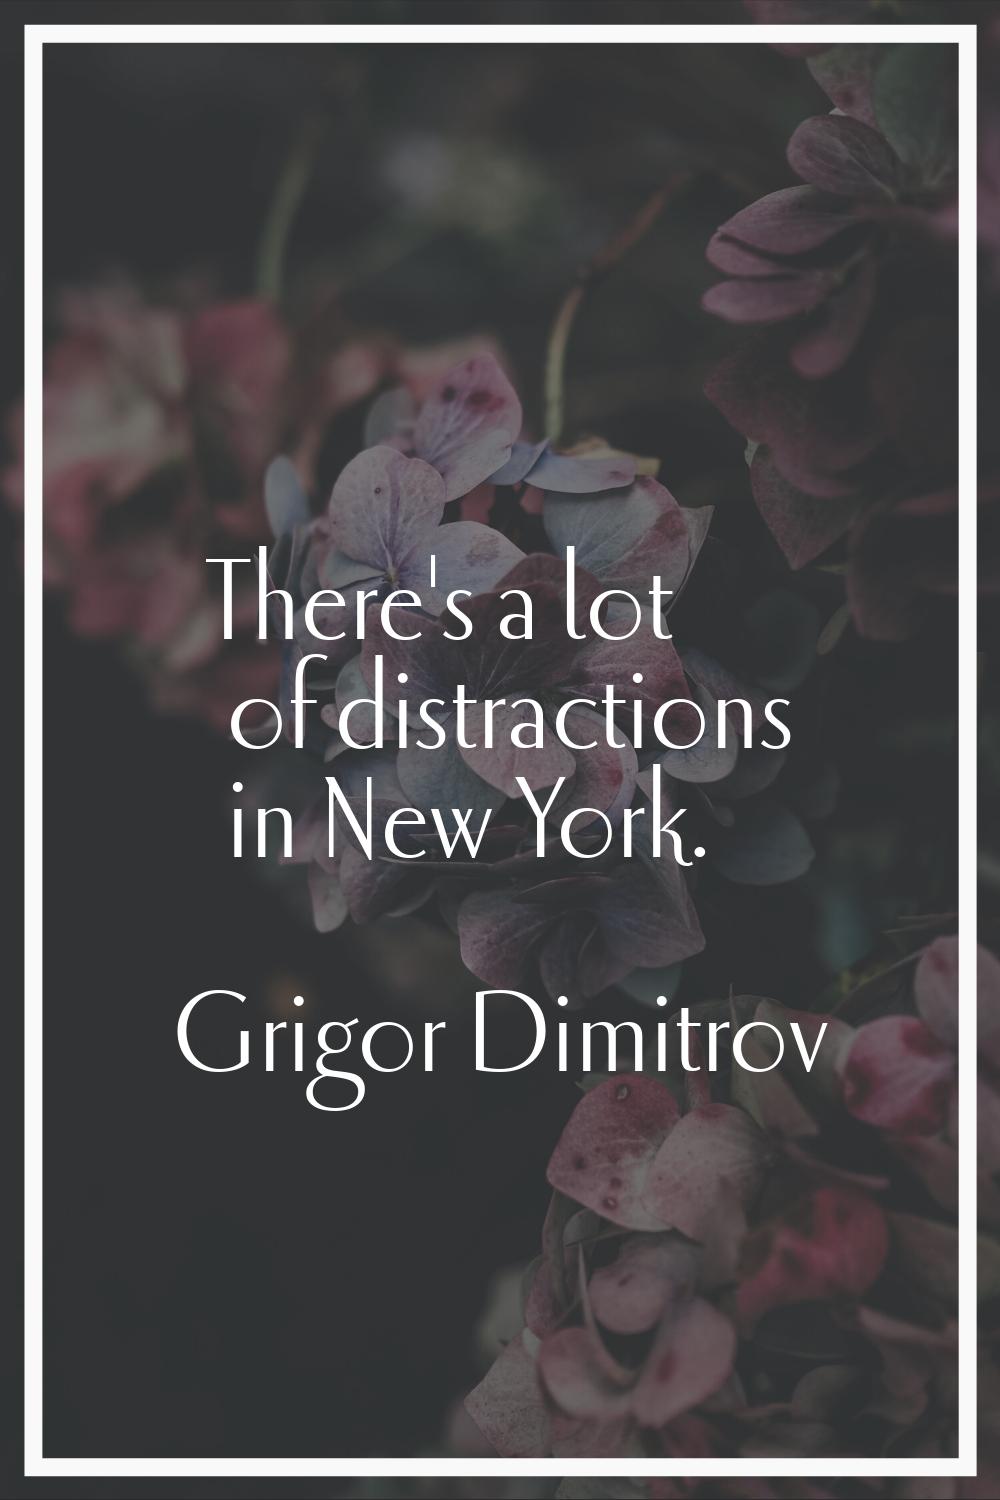 There's a lot of distractions in New York.